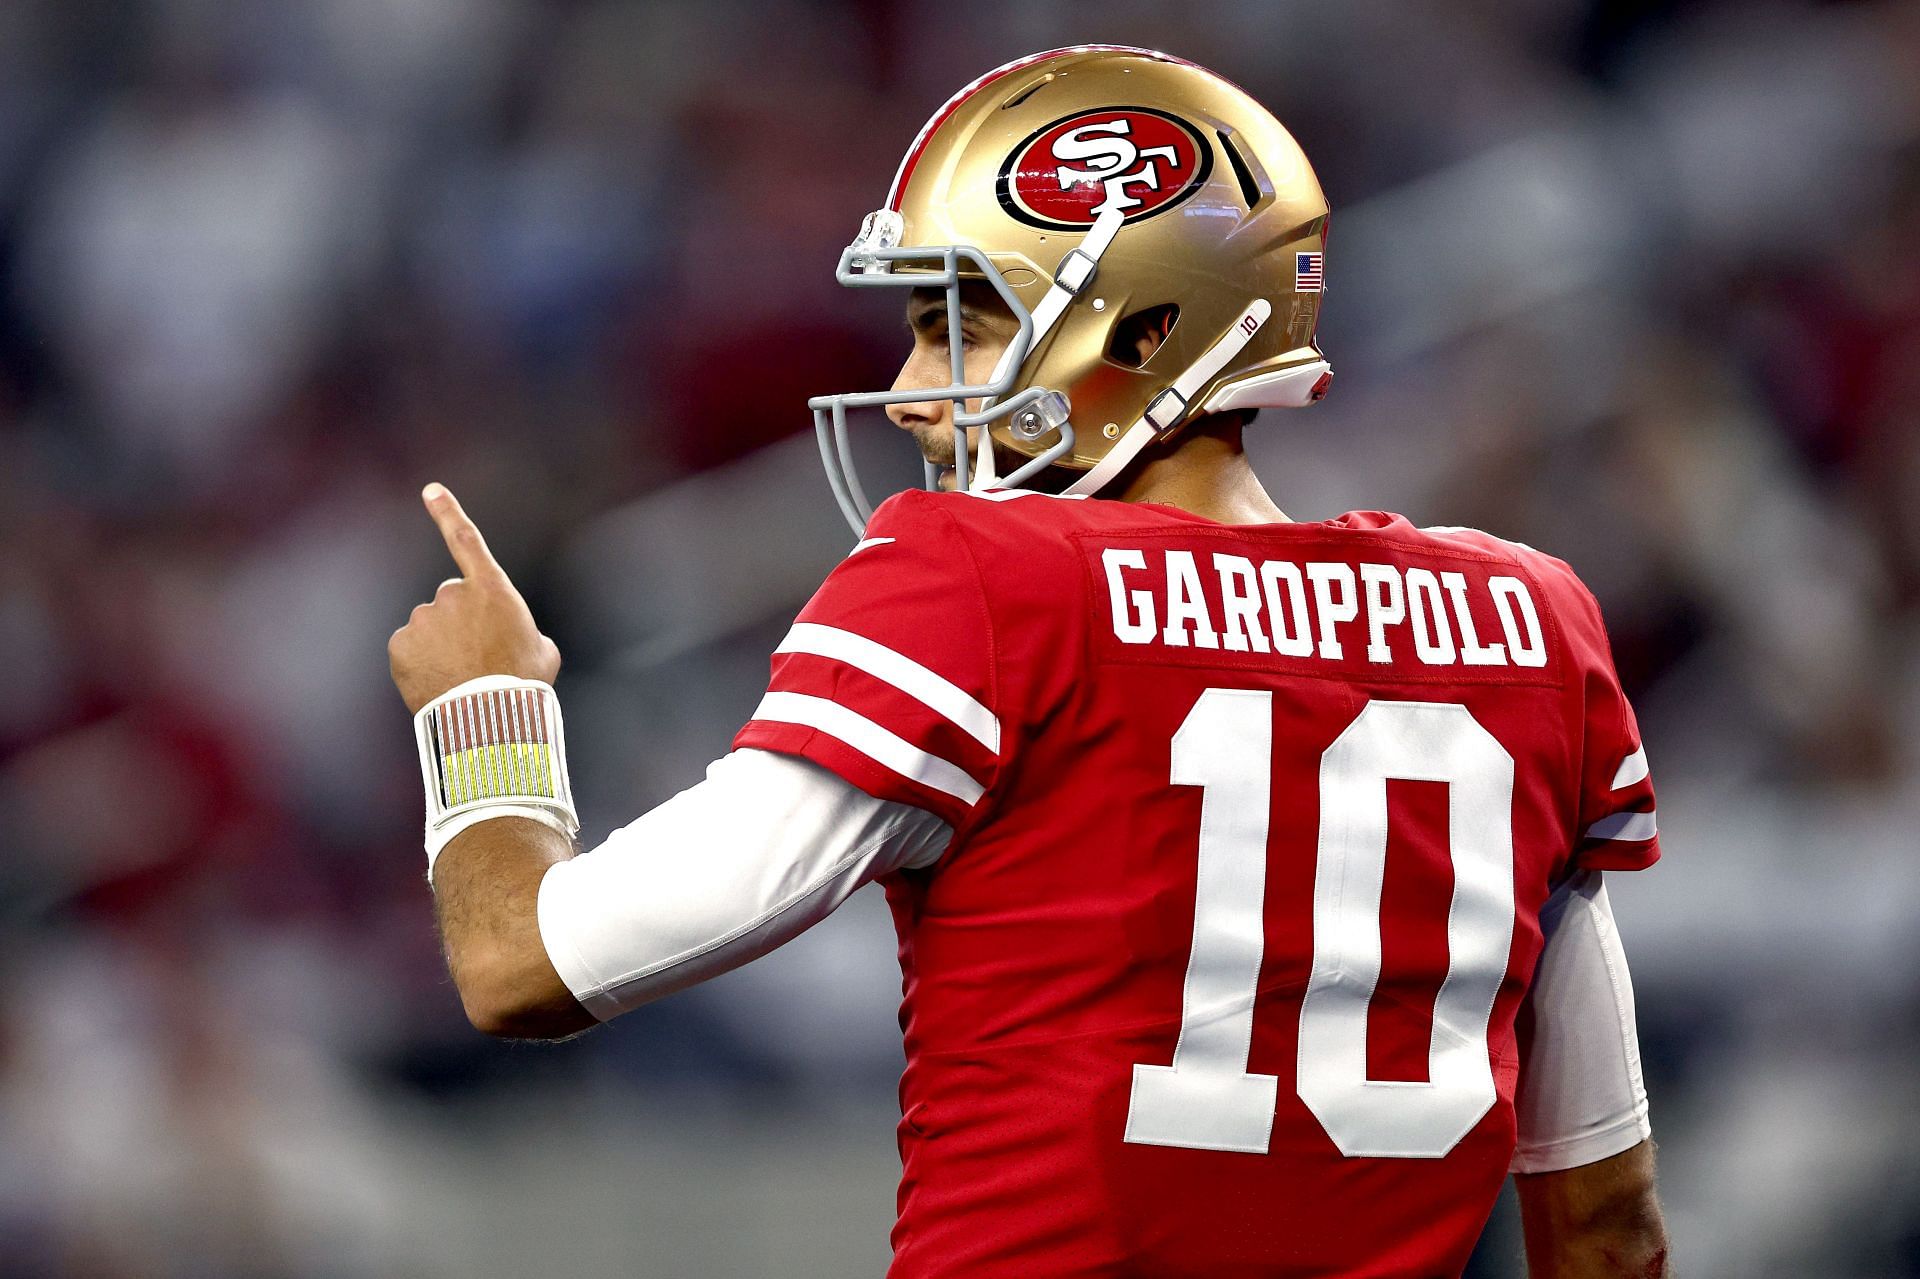 Jimmy Garoppolo may be picked up by Seahawks if not the Browns